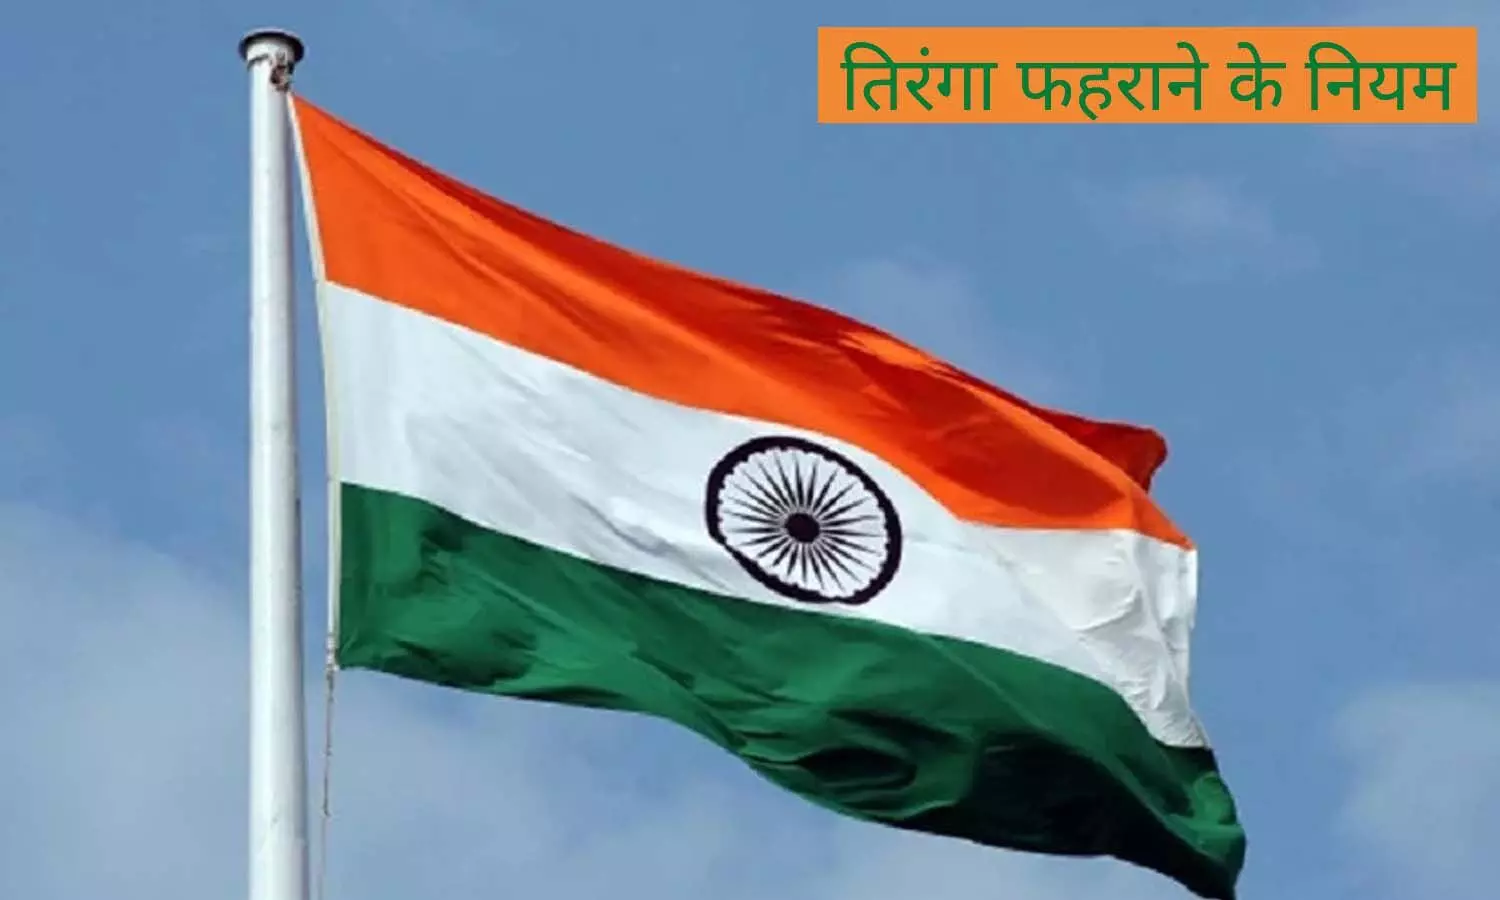 What are the rules for hoisting the tricolor, what is the punishment for disrespecting the flag